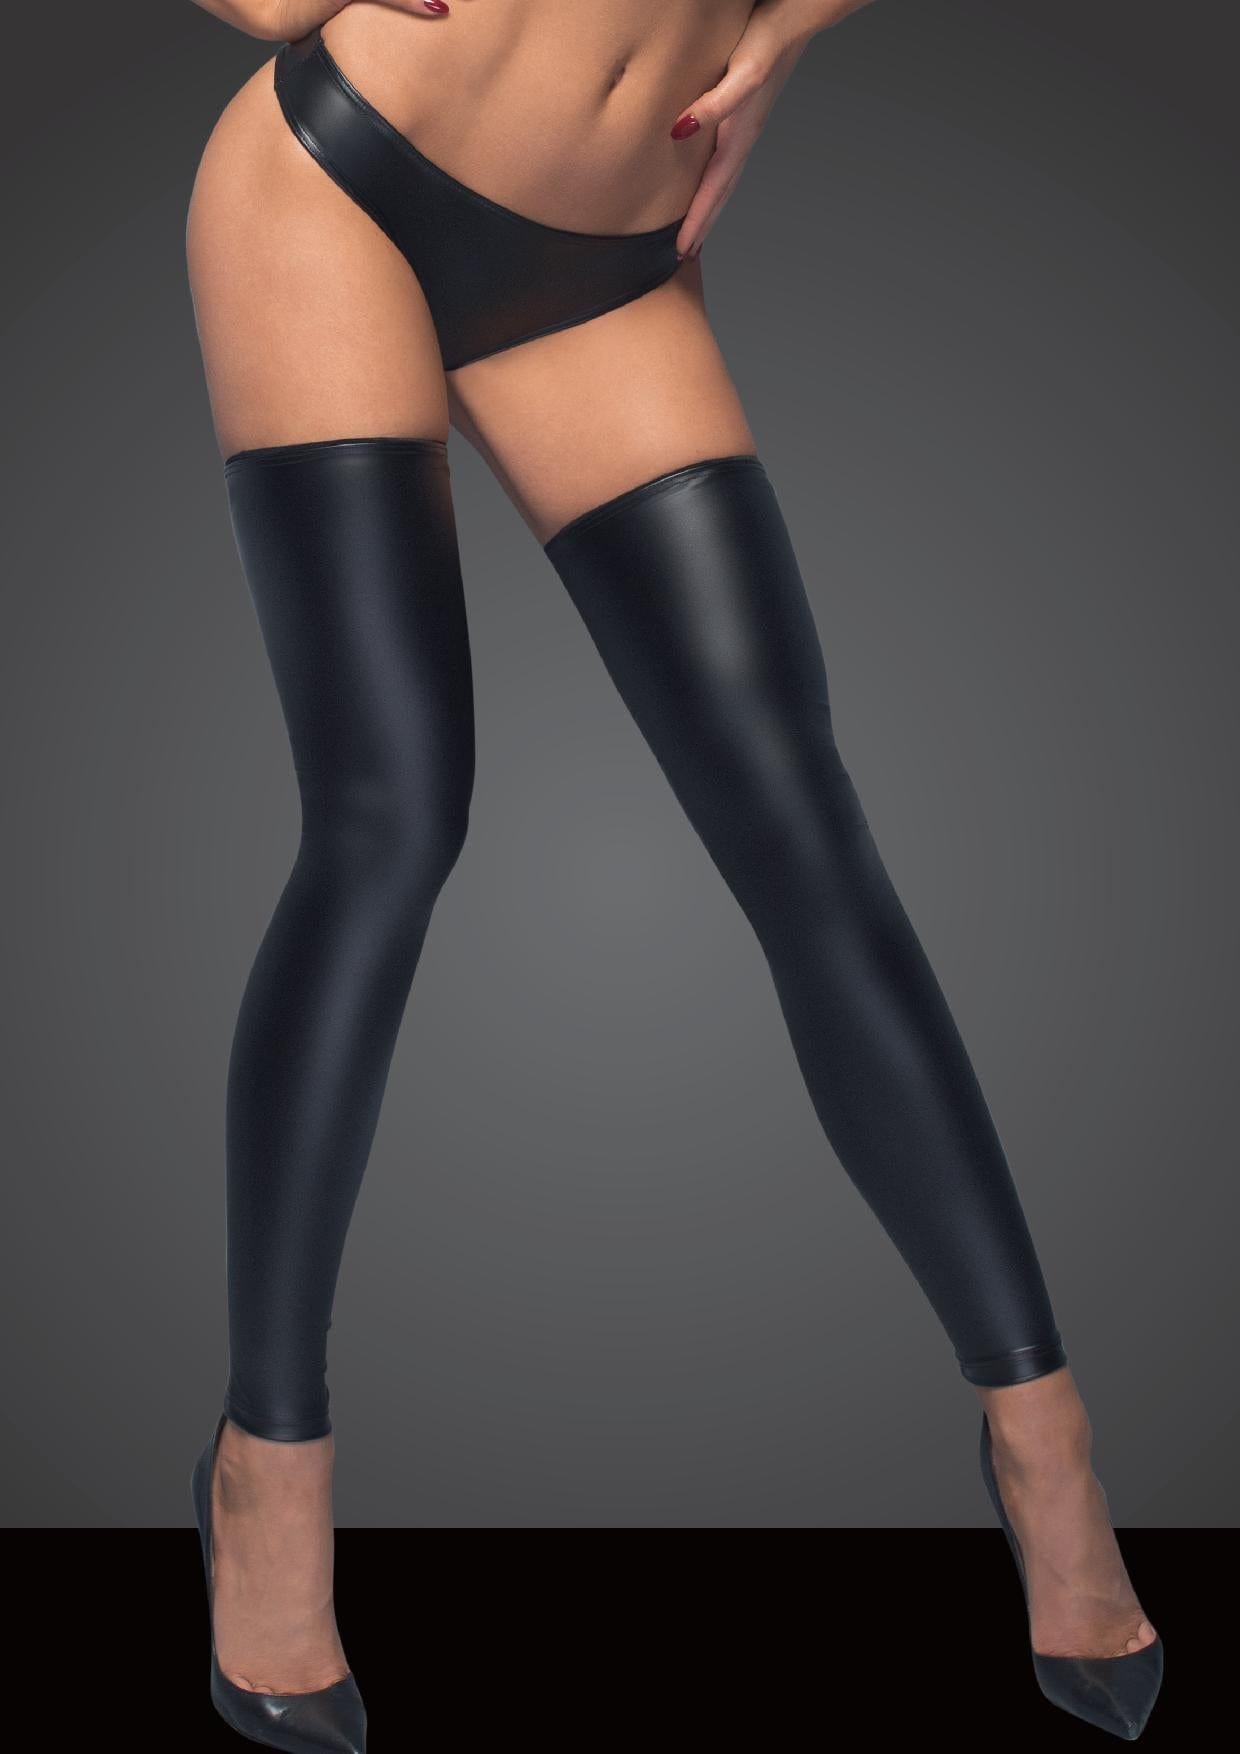 Noir Lingerie Black / Small Power Wetlook Stockings And Panties With Silver Zipper 5903050101145